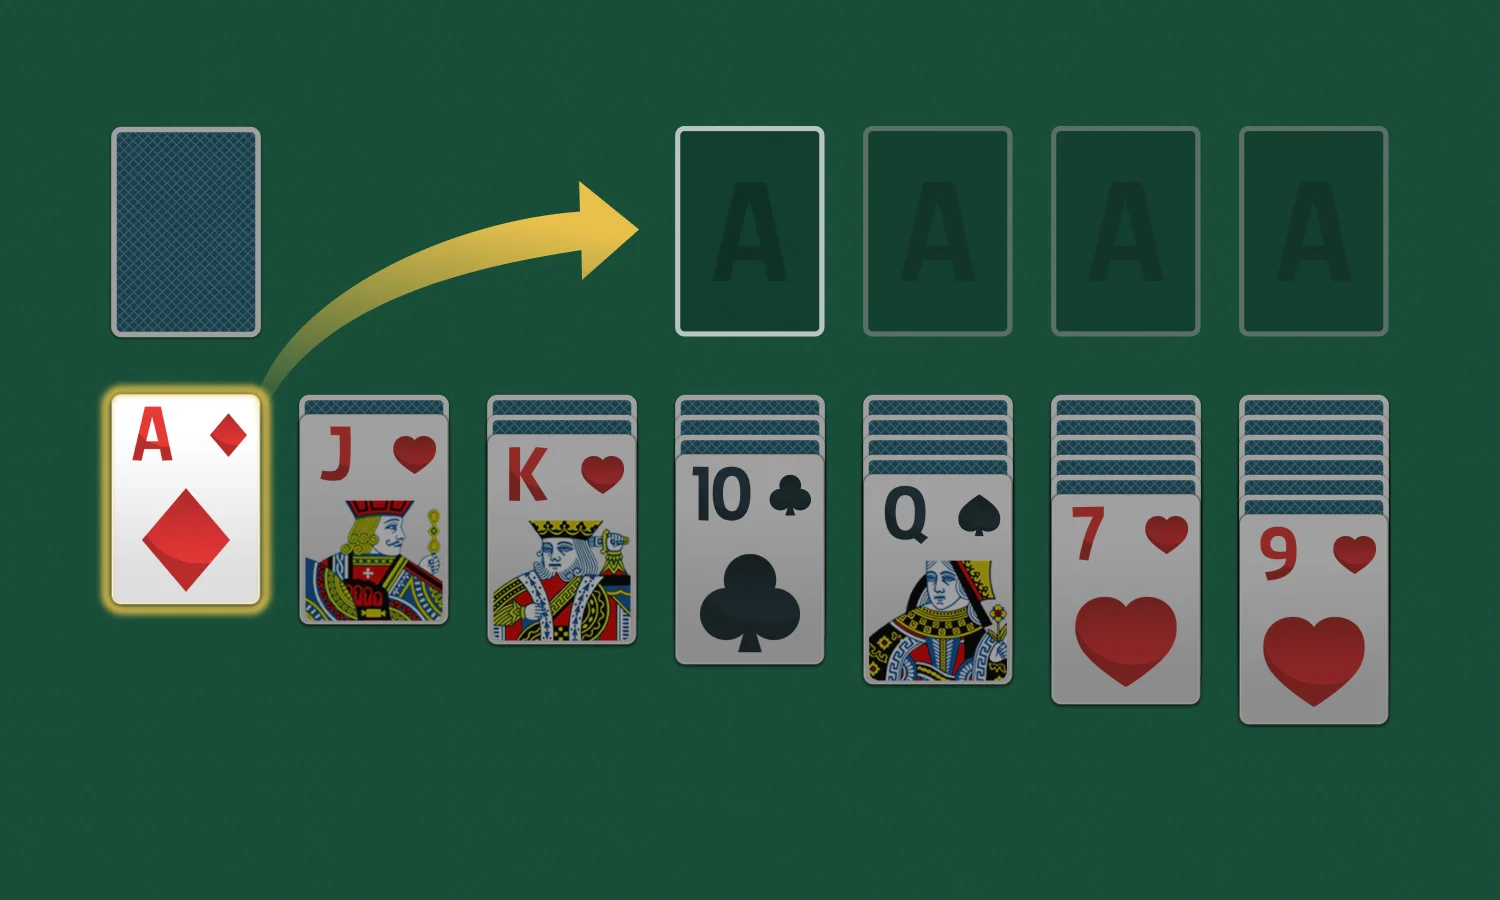 Solitaire Rules: Move Cards to the Foundation Piles